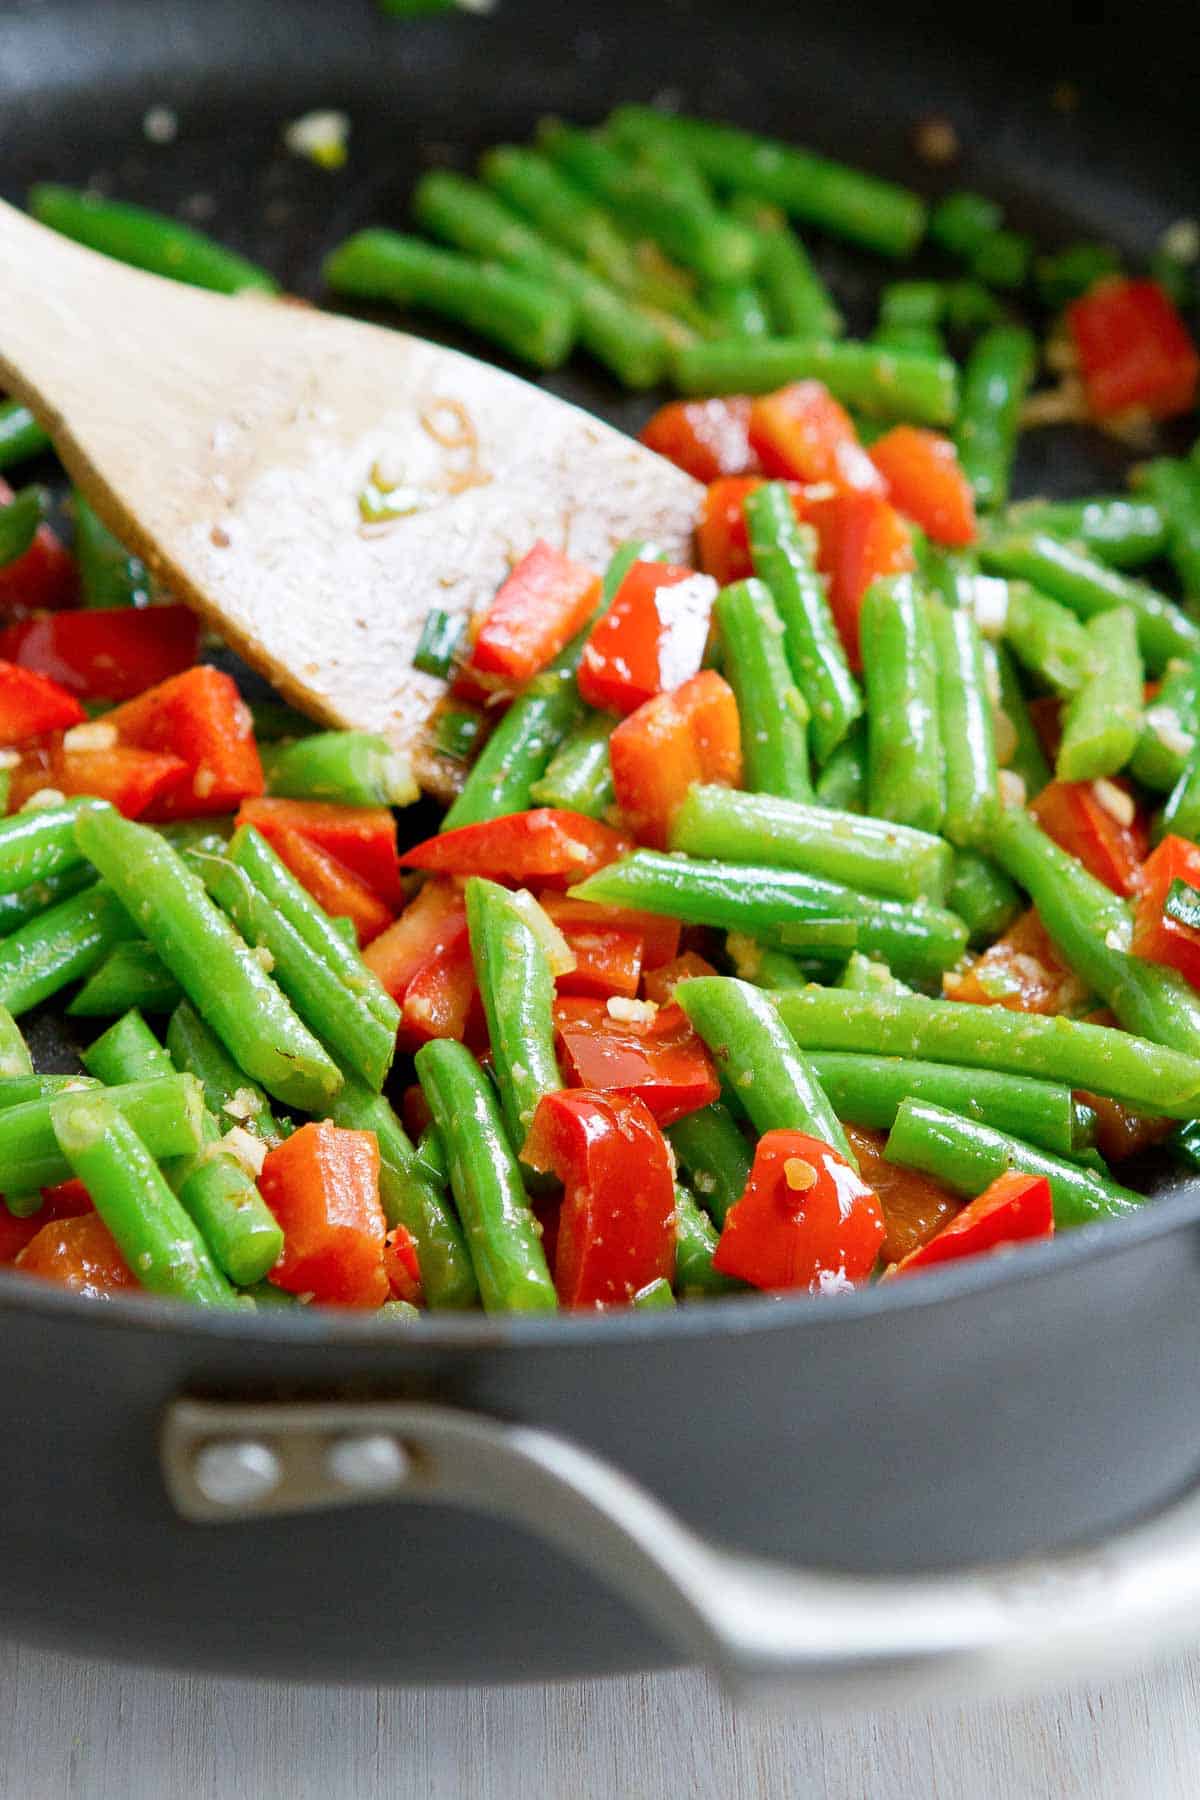 Green beans and red bell peppers being stir fried in a nonstick pan with garlic and ginger.